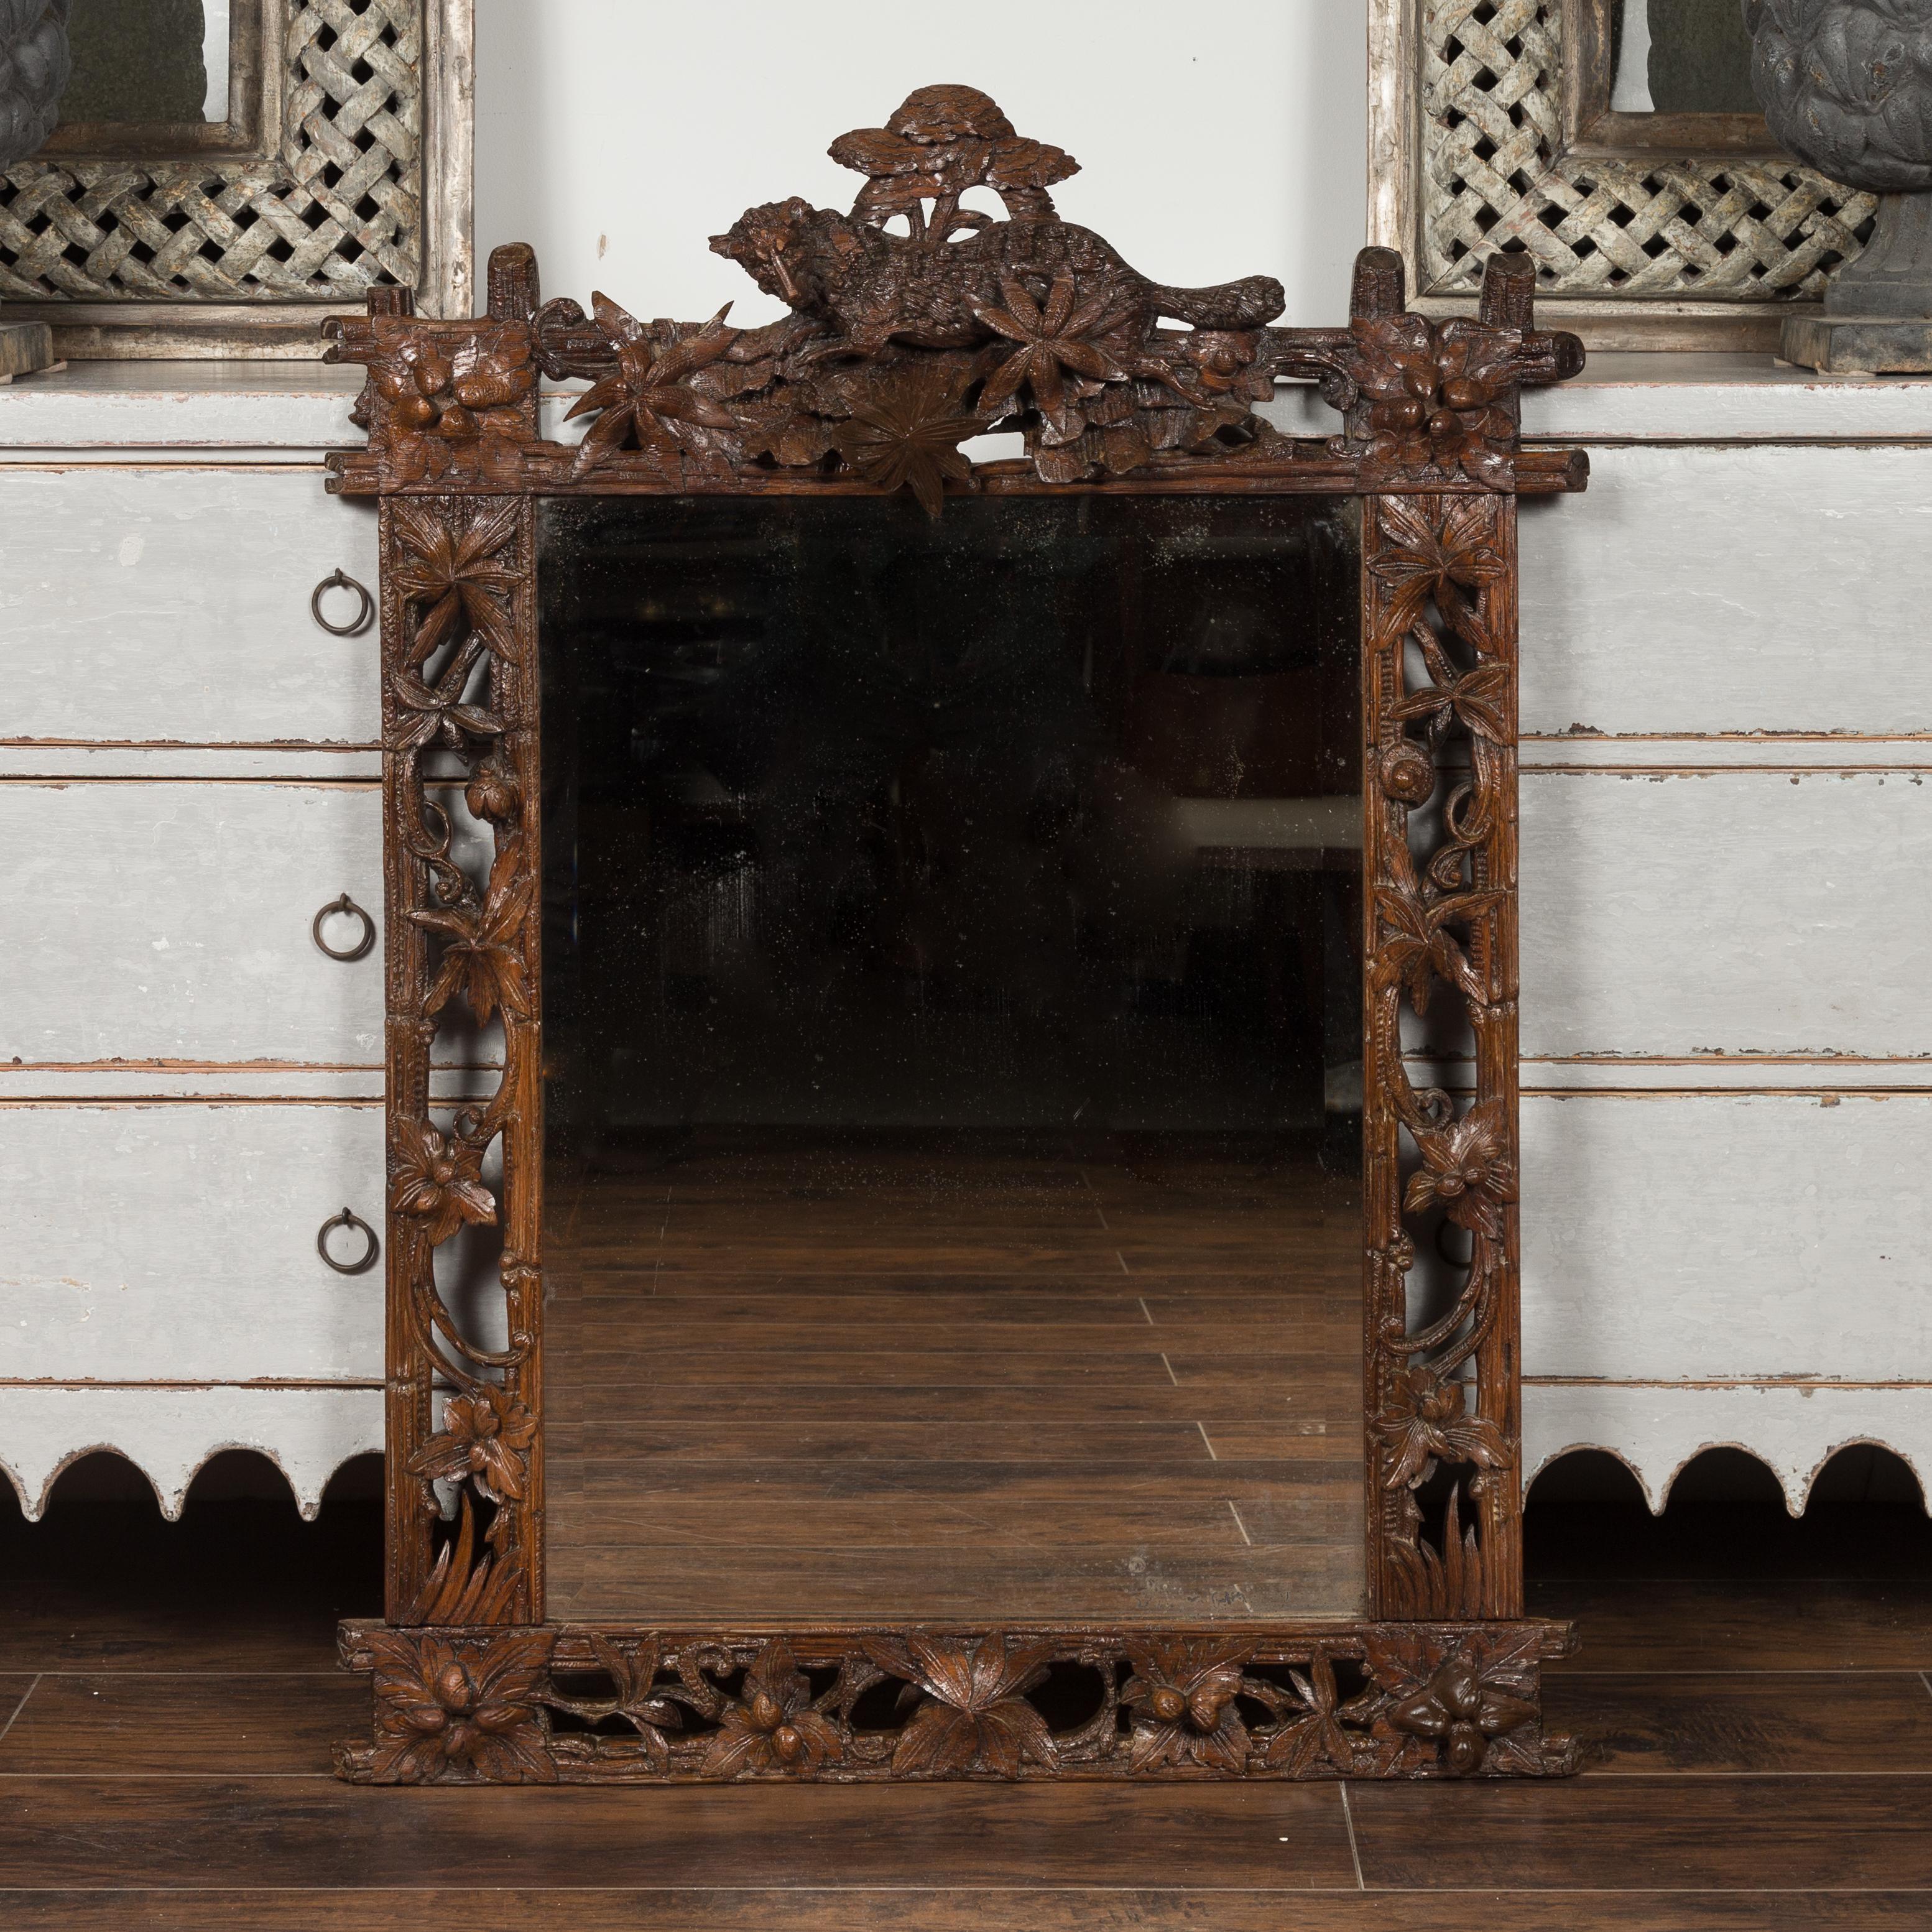 A French Black Forest carved wood mirror from the late 19th century, with fox and foliage motifs. Created in France during the last quarter of the 19th century, this Black Forest mirror features a rectangular frame adorned with exquisite carvings